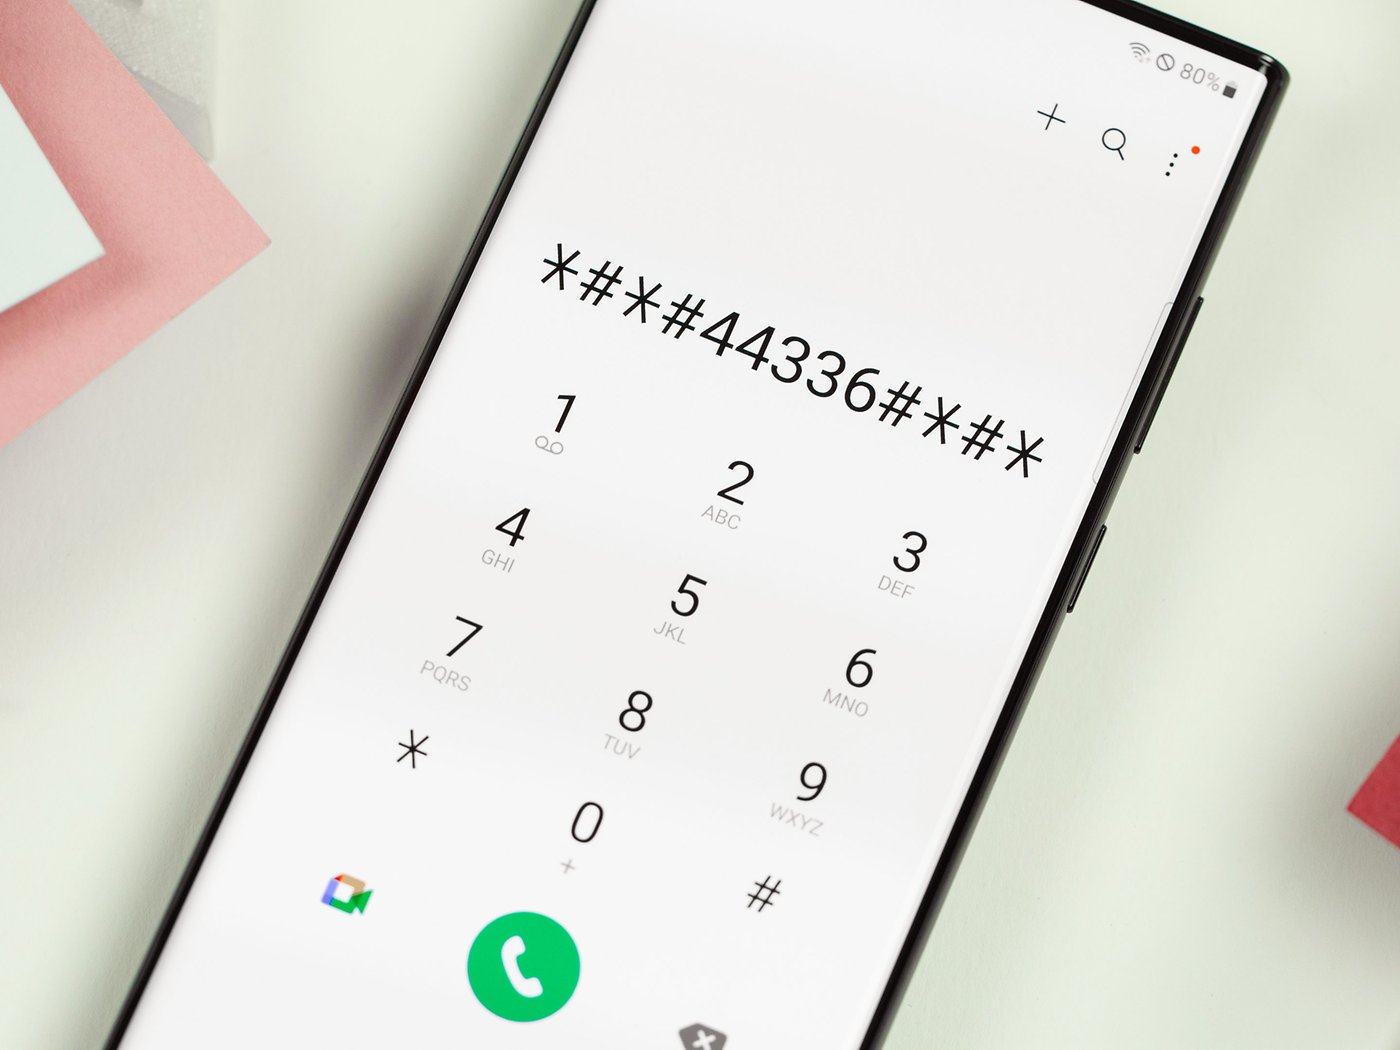 How to Access the Hidden Symbols on Your Android Phone's Keyboard